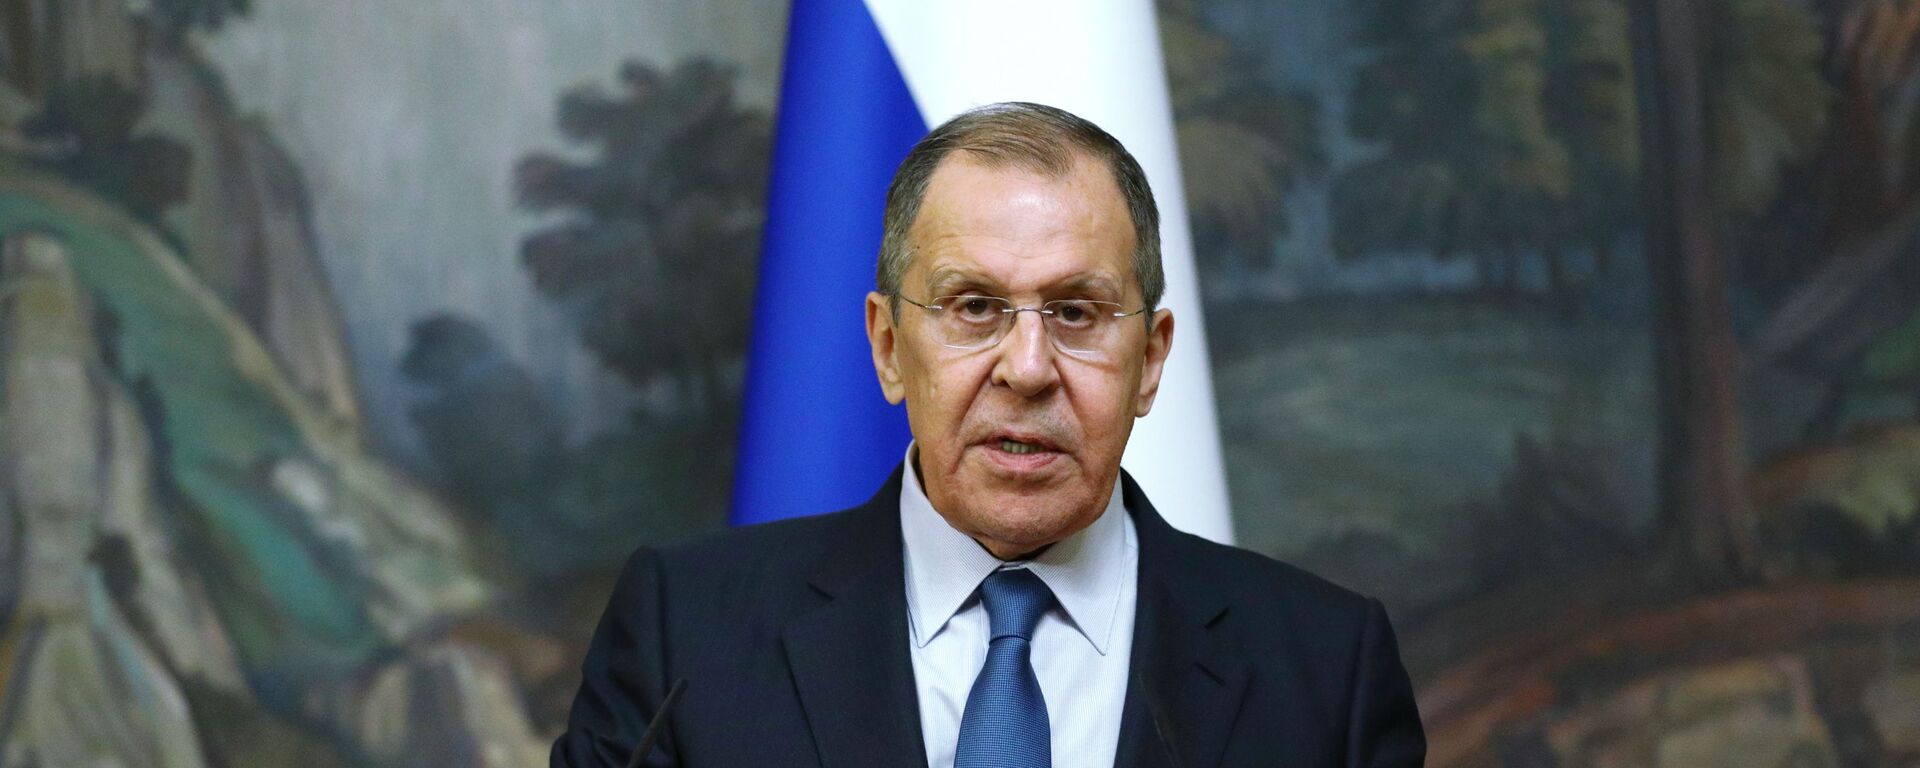 Russian Foreign Minister Sergey Lavrov delivers a joint statement after trilateral talks between Russia, Armenia and Azerbaijan over Nagorno-Karabakh ceasefire, 10 October 2020 - Sputnik International, 1920, 18.08.2023